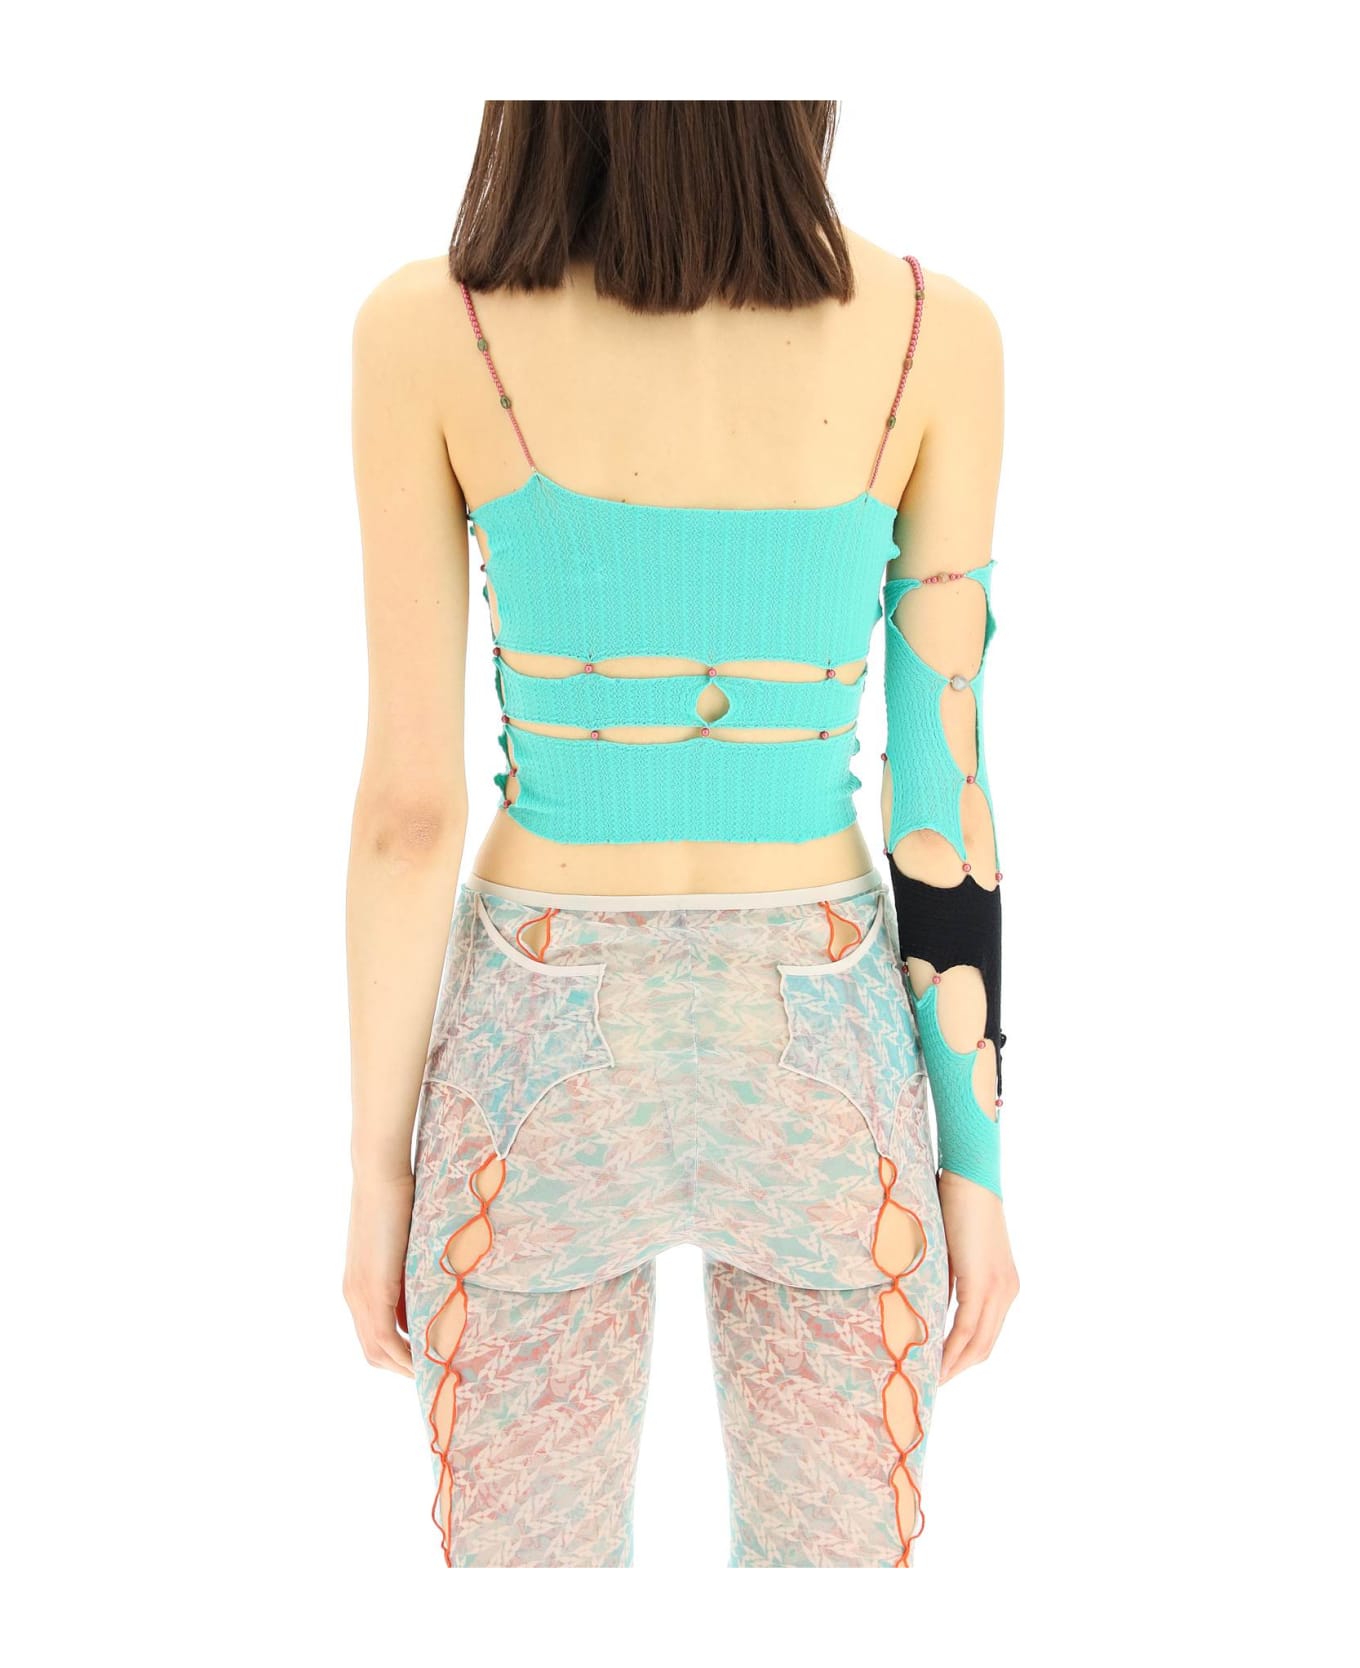 Rui Knit Sleeve With Cut-out And Beads - SEAFOAM ONYX (Green)